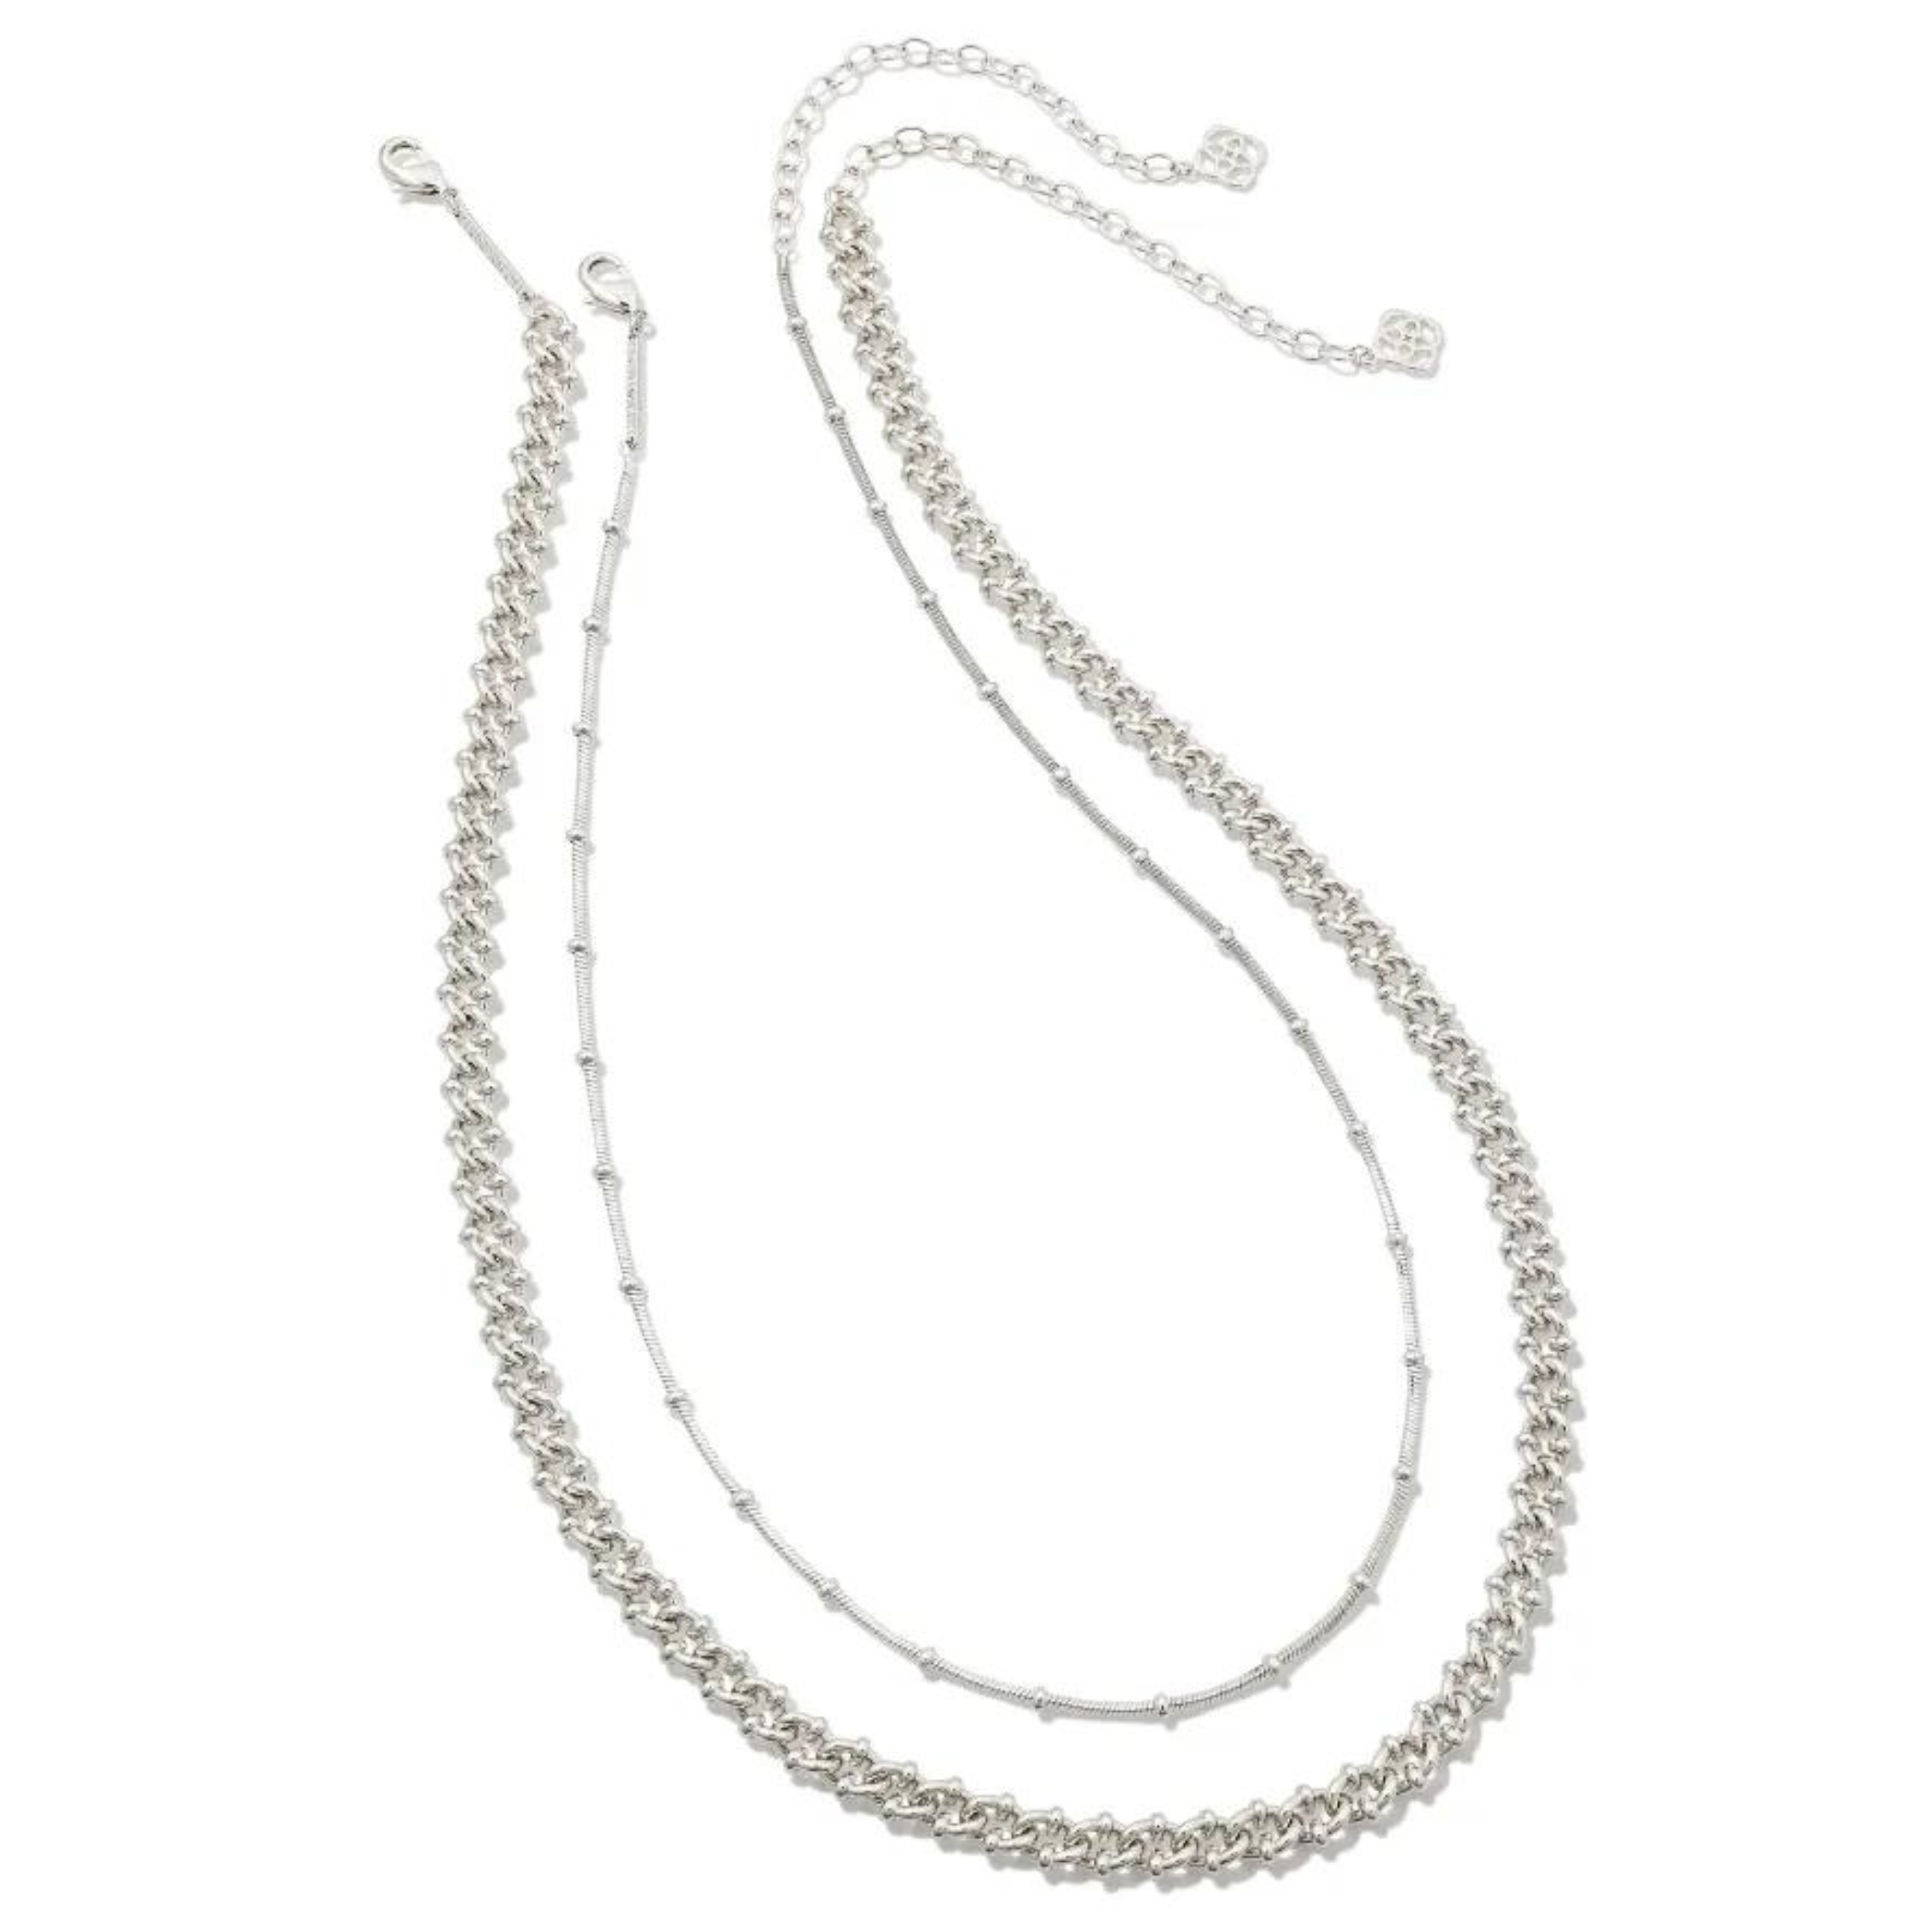 Set of 2 silver chain necklaces, pictured on a white background.